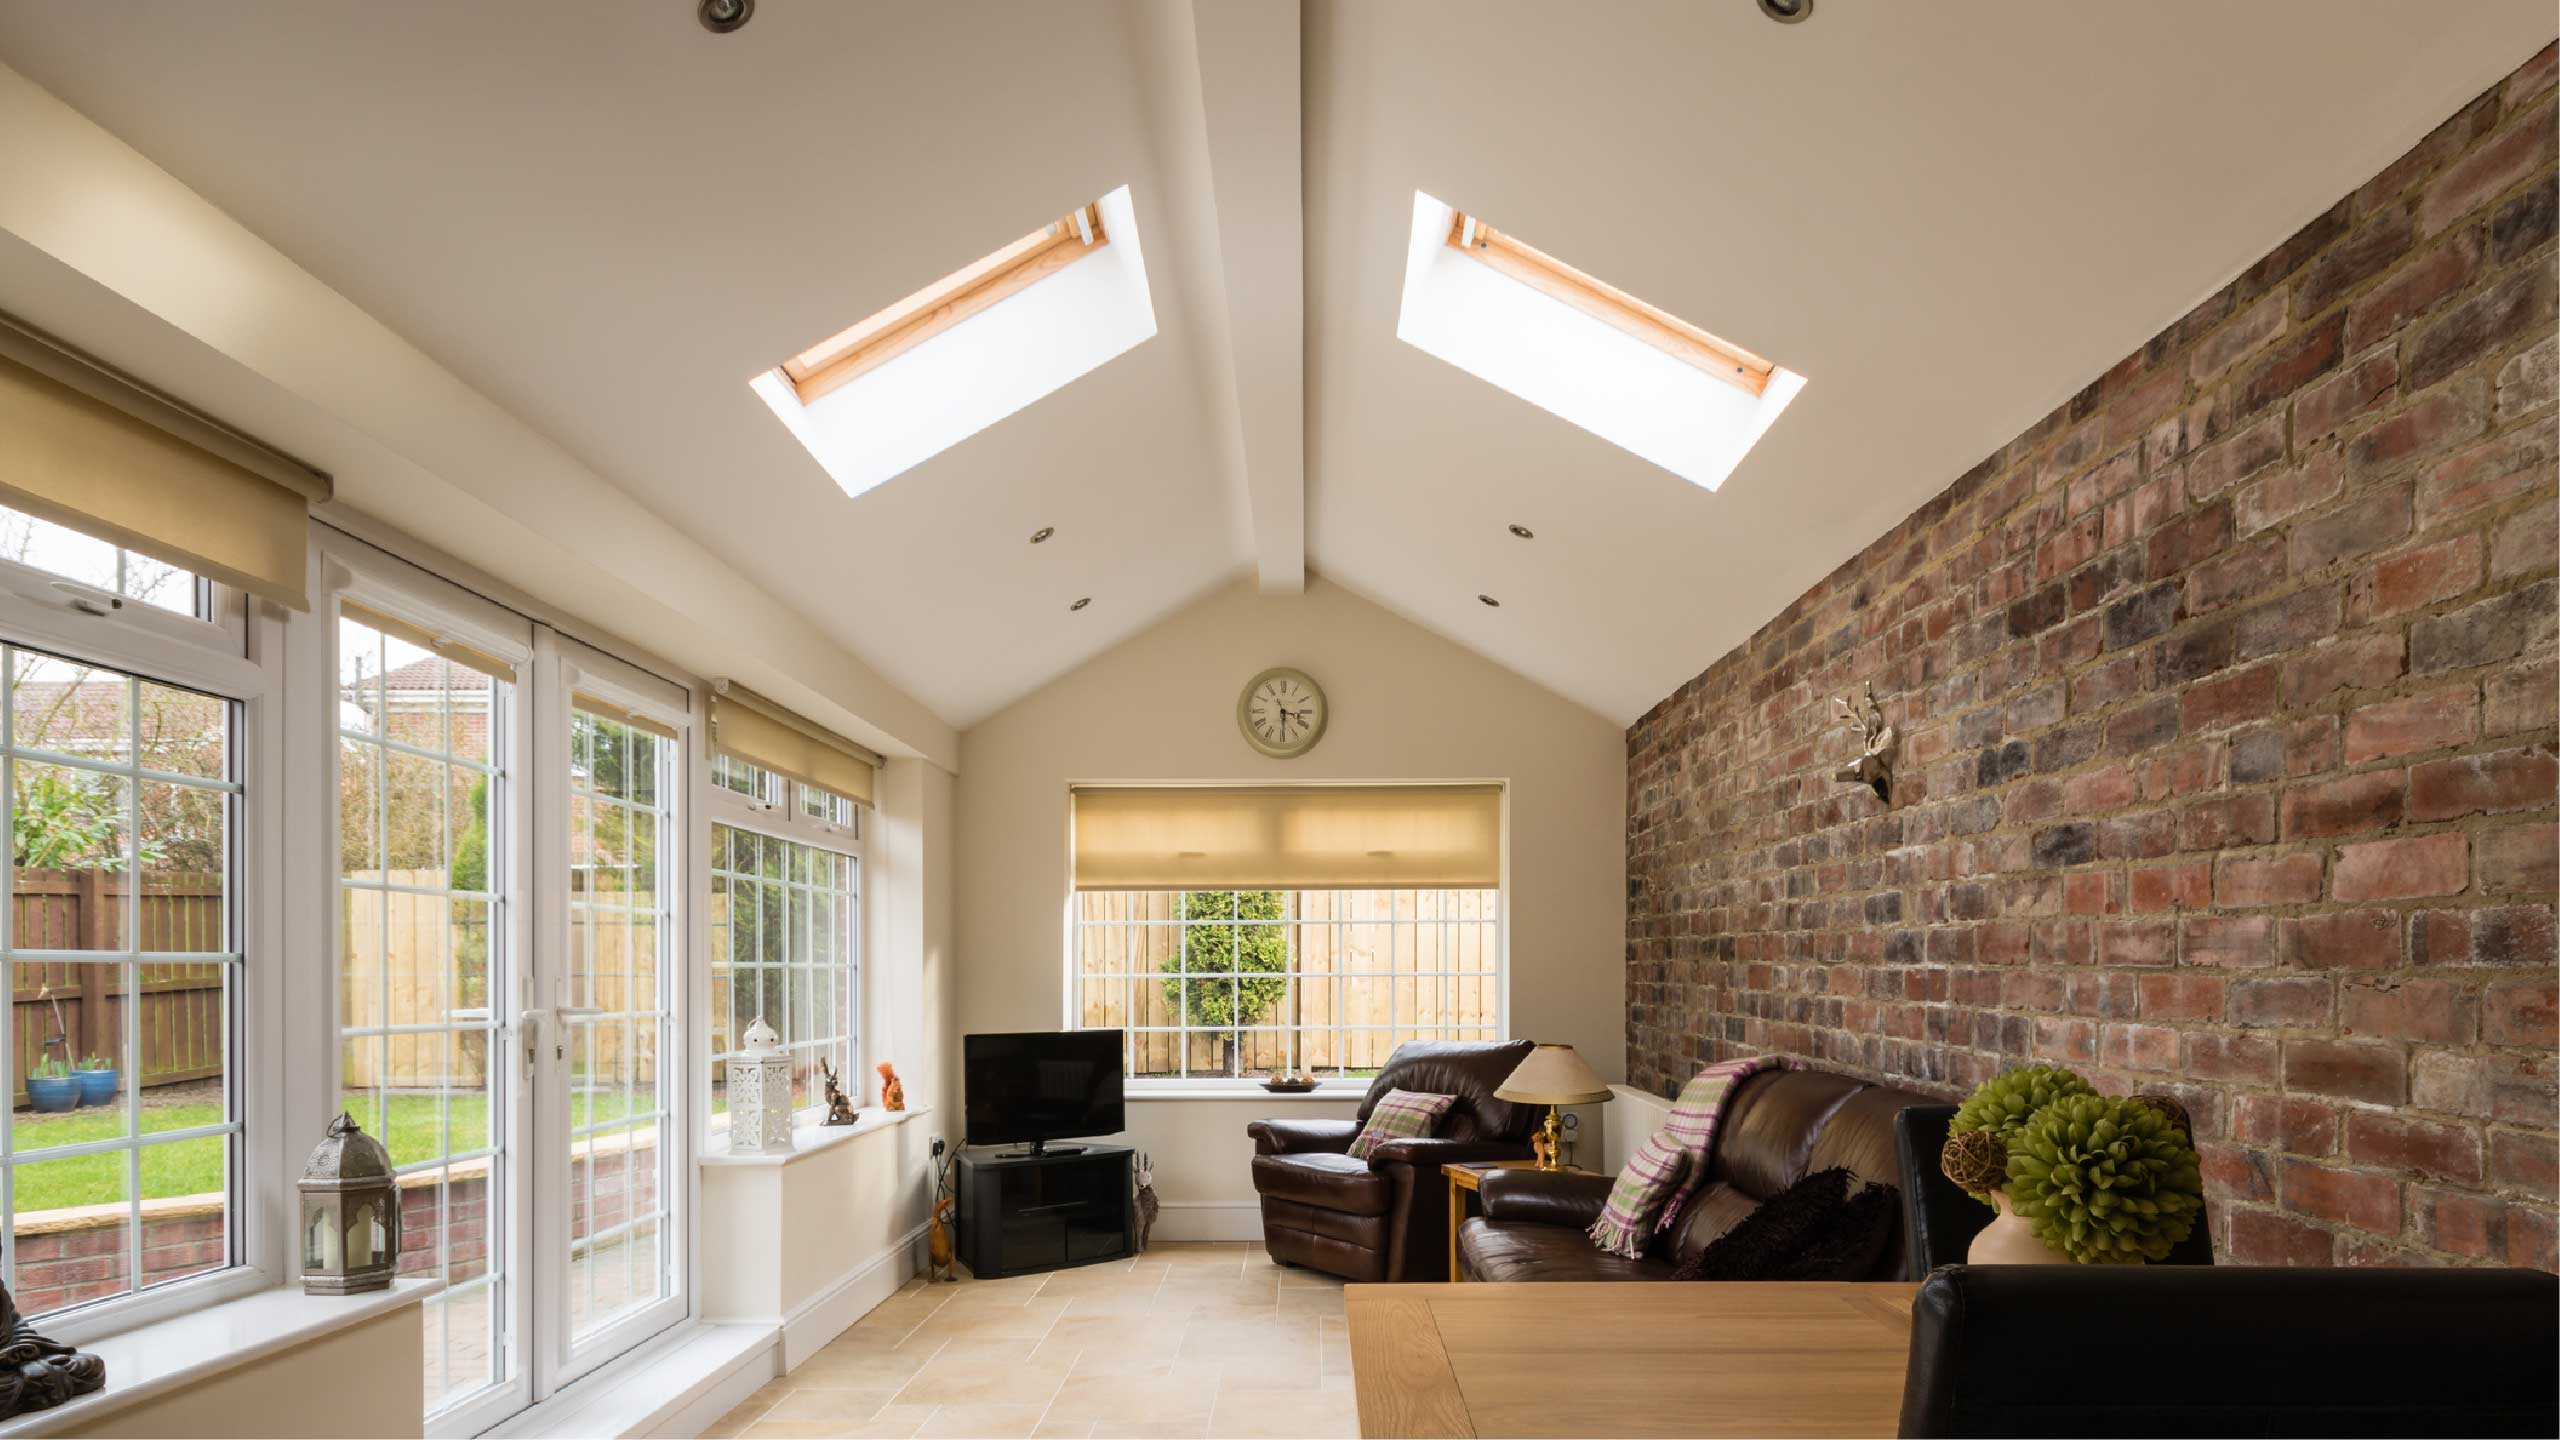 Garage Conversion Considerations Admiral, How Much For A Double Garage Conversion